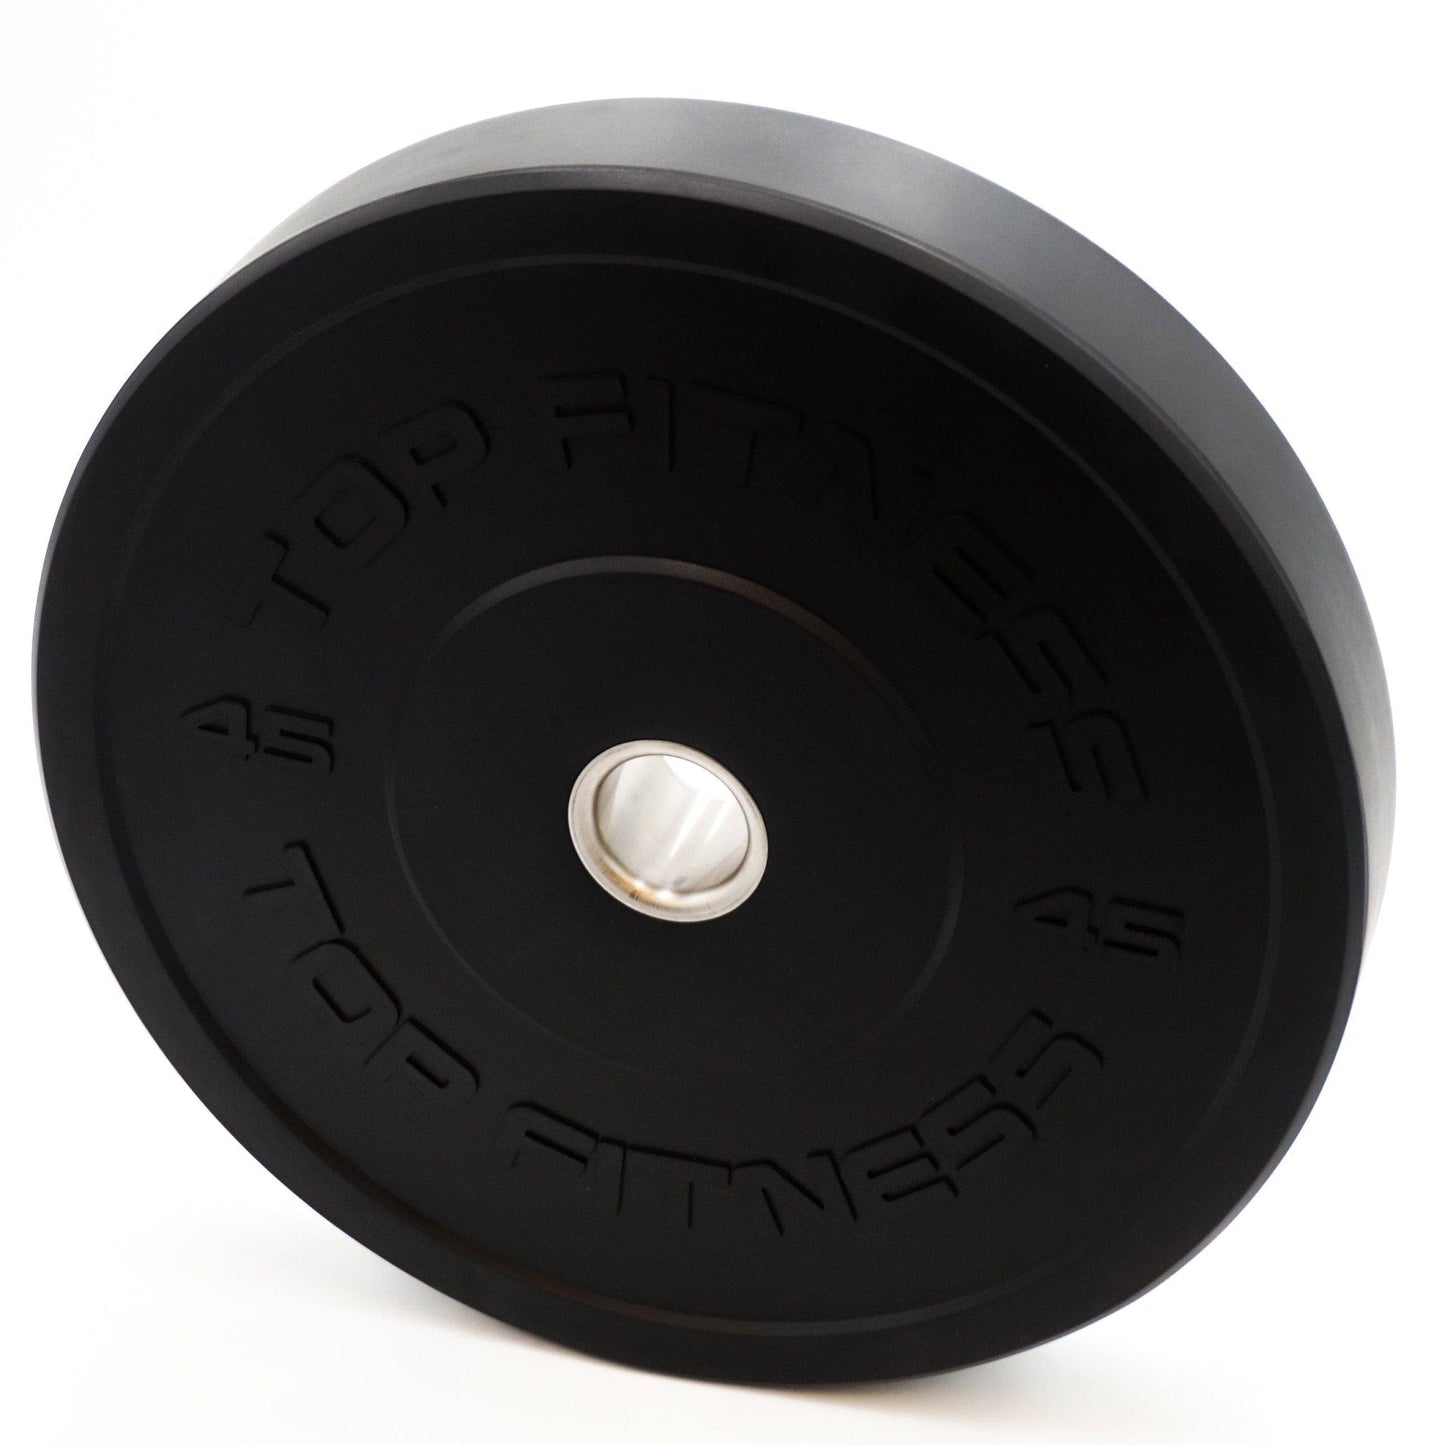 Top Fitness Olympic Bumper Plate Weight Plates Top Fitness 45LB